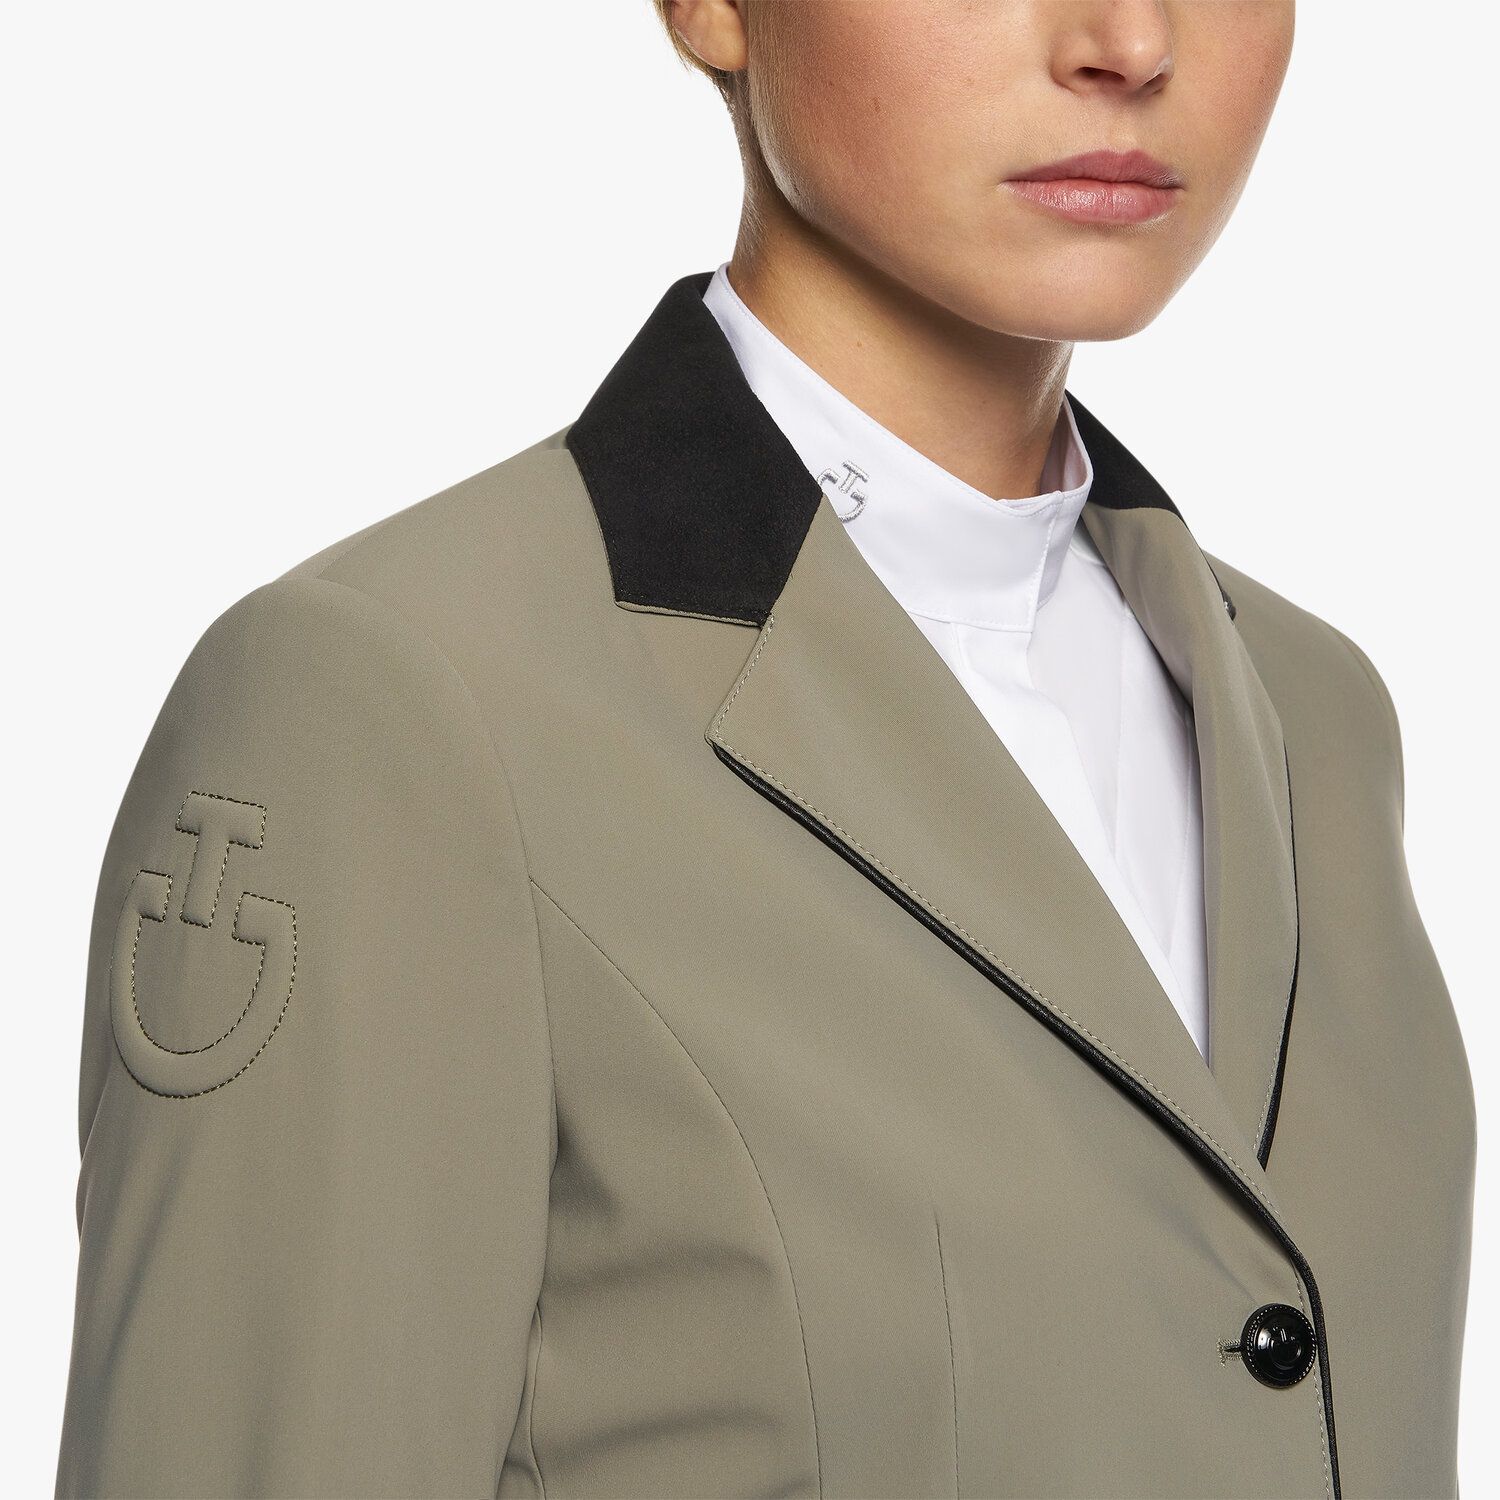 Women's competition riding jacket.